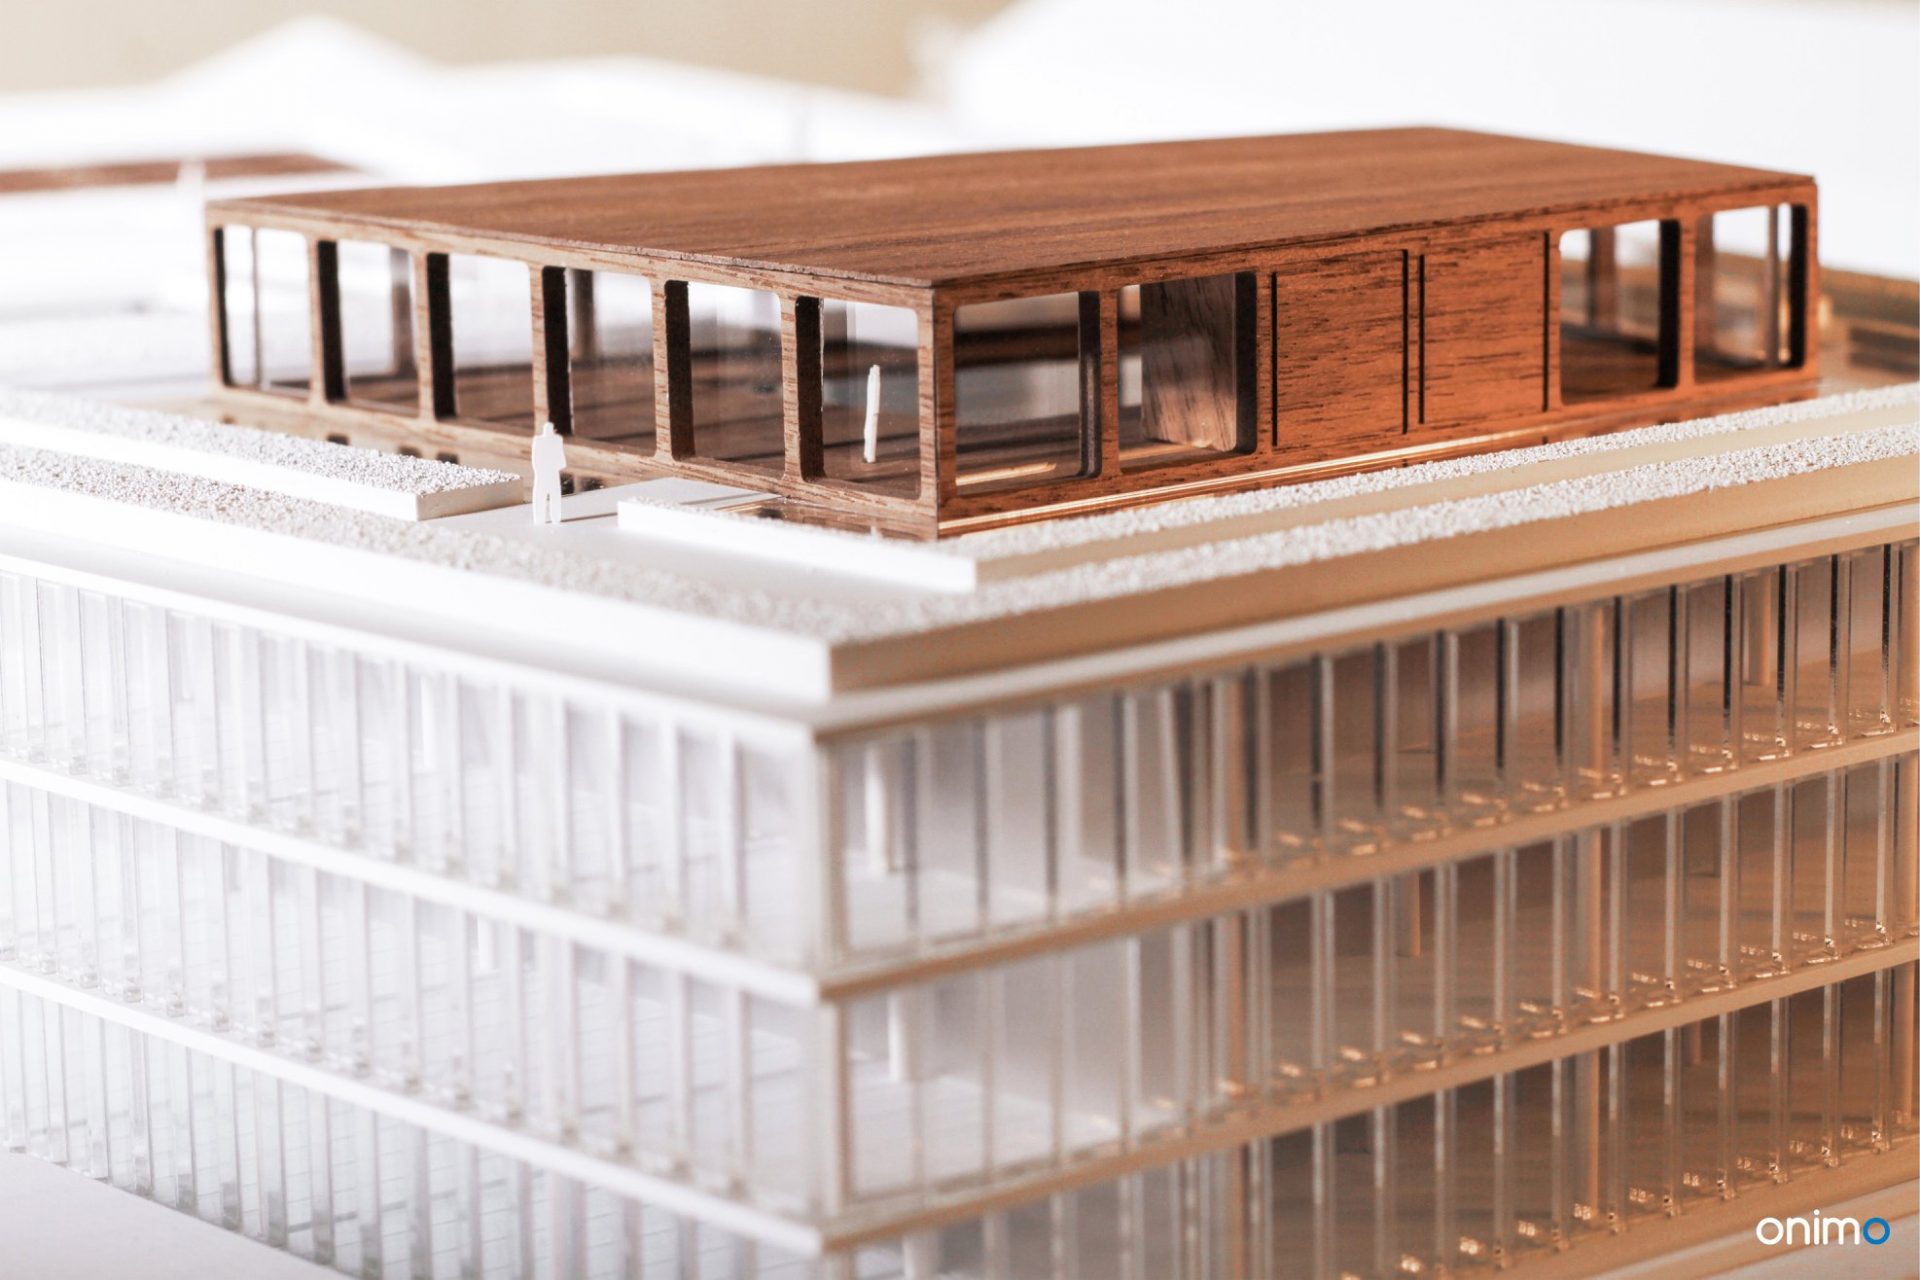 Didactic building of the University of Warsaw, BDR Architekci, ONIMO, best architectural models, best buildings models